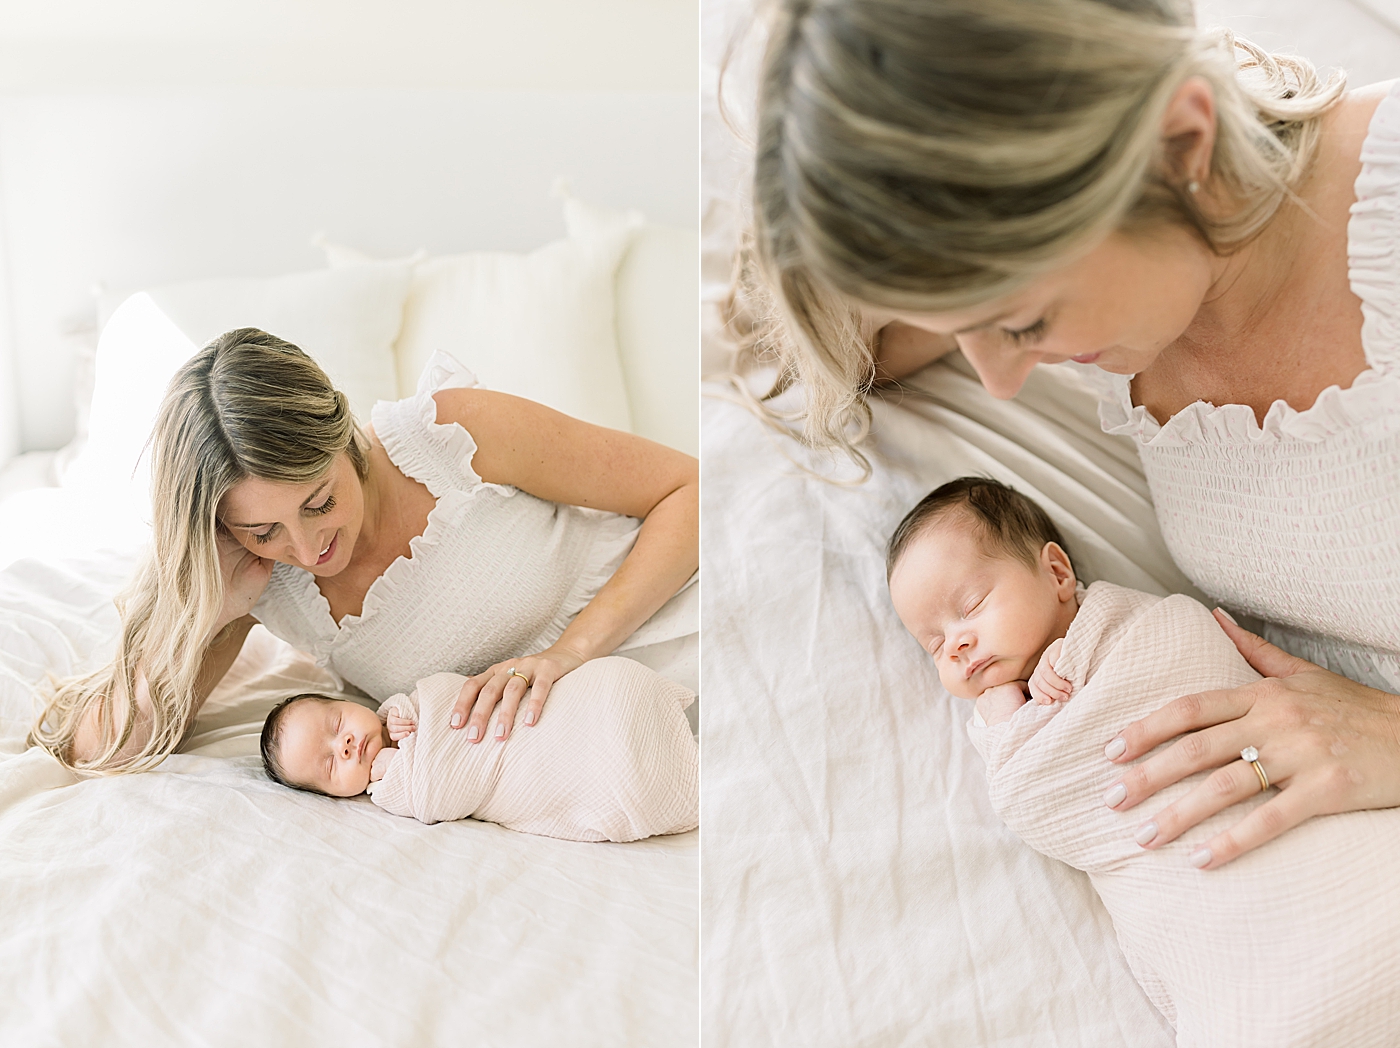 Mom in a white dress laying on her bed admiring her newborn baby girl | Image by Caitlyn Motycka